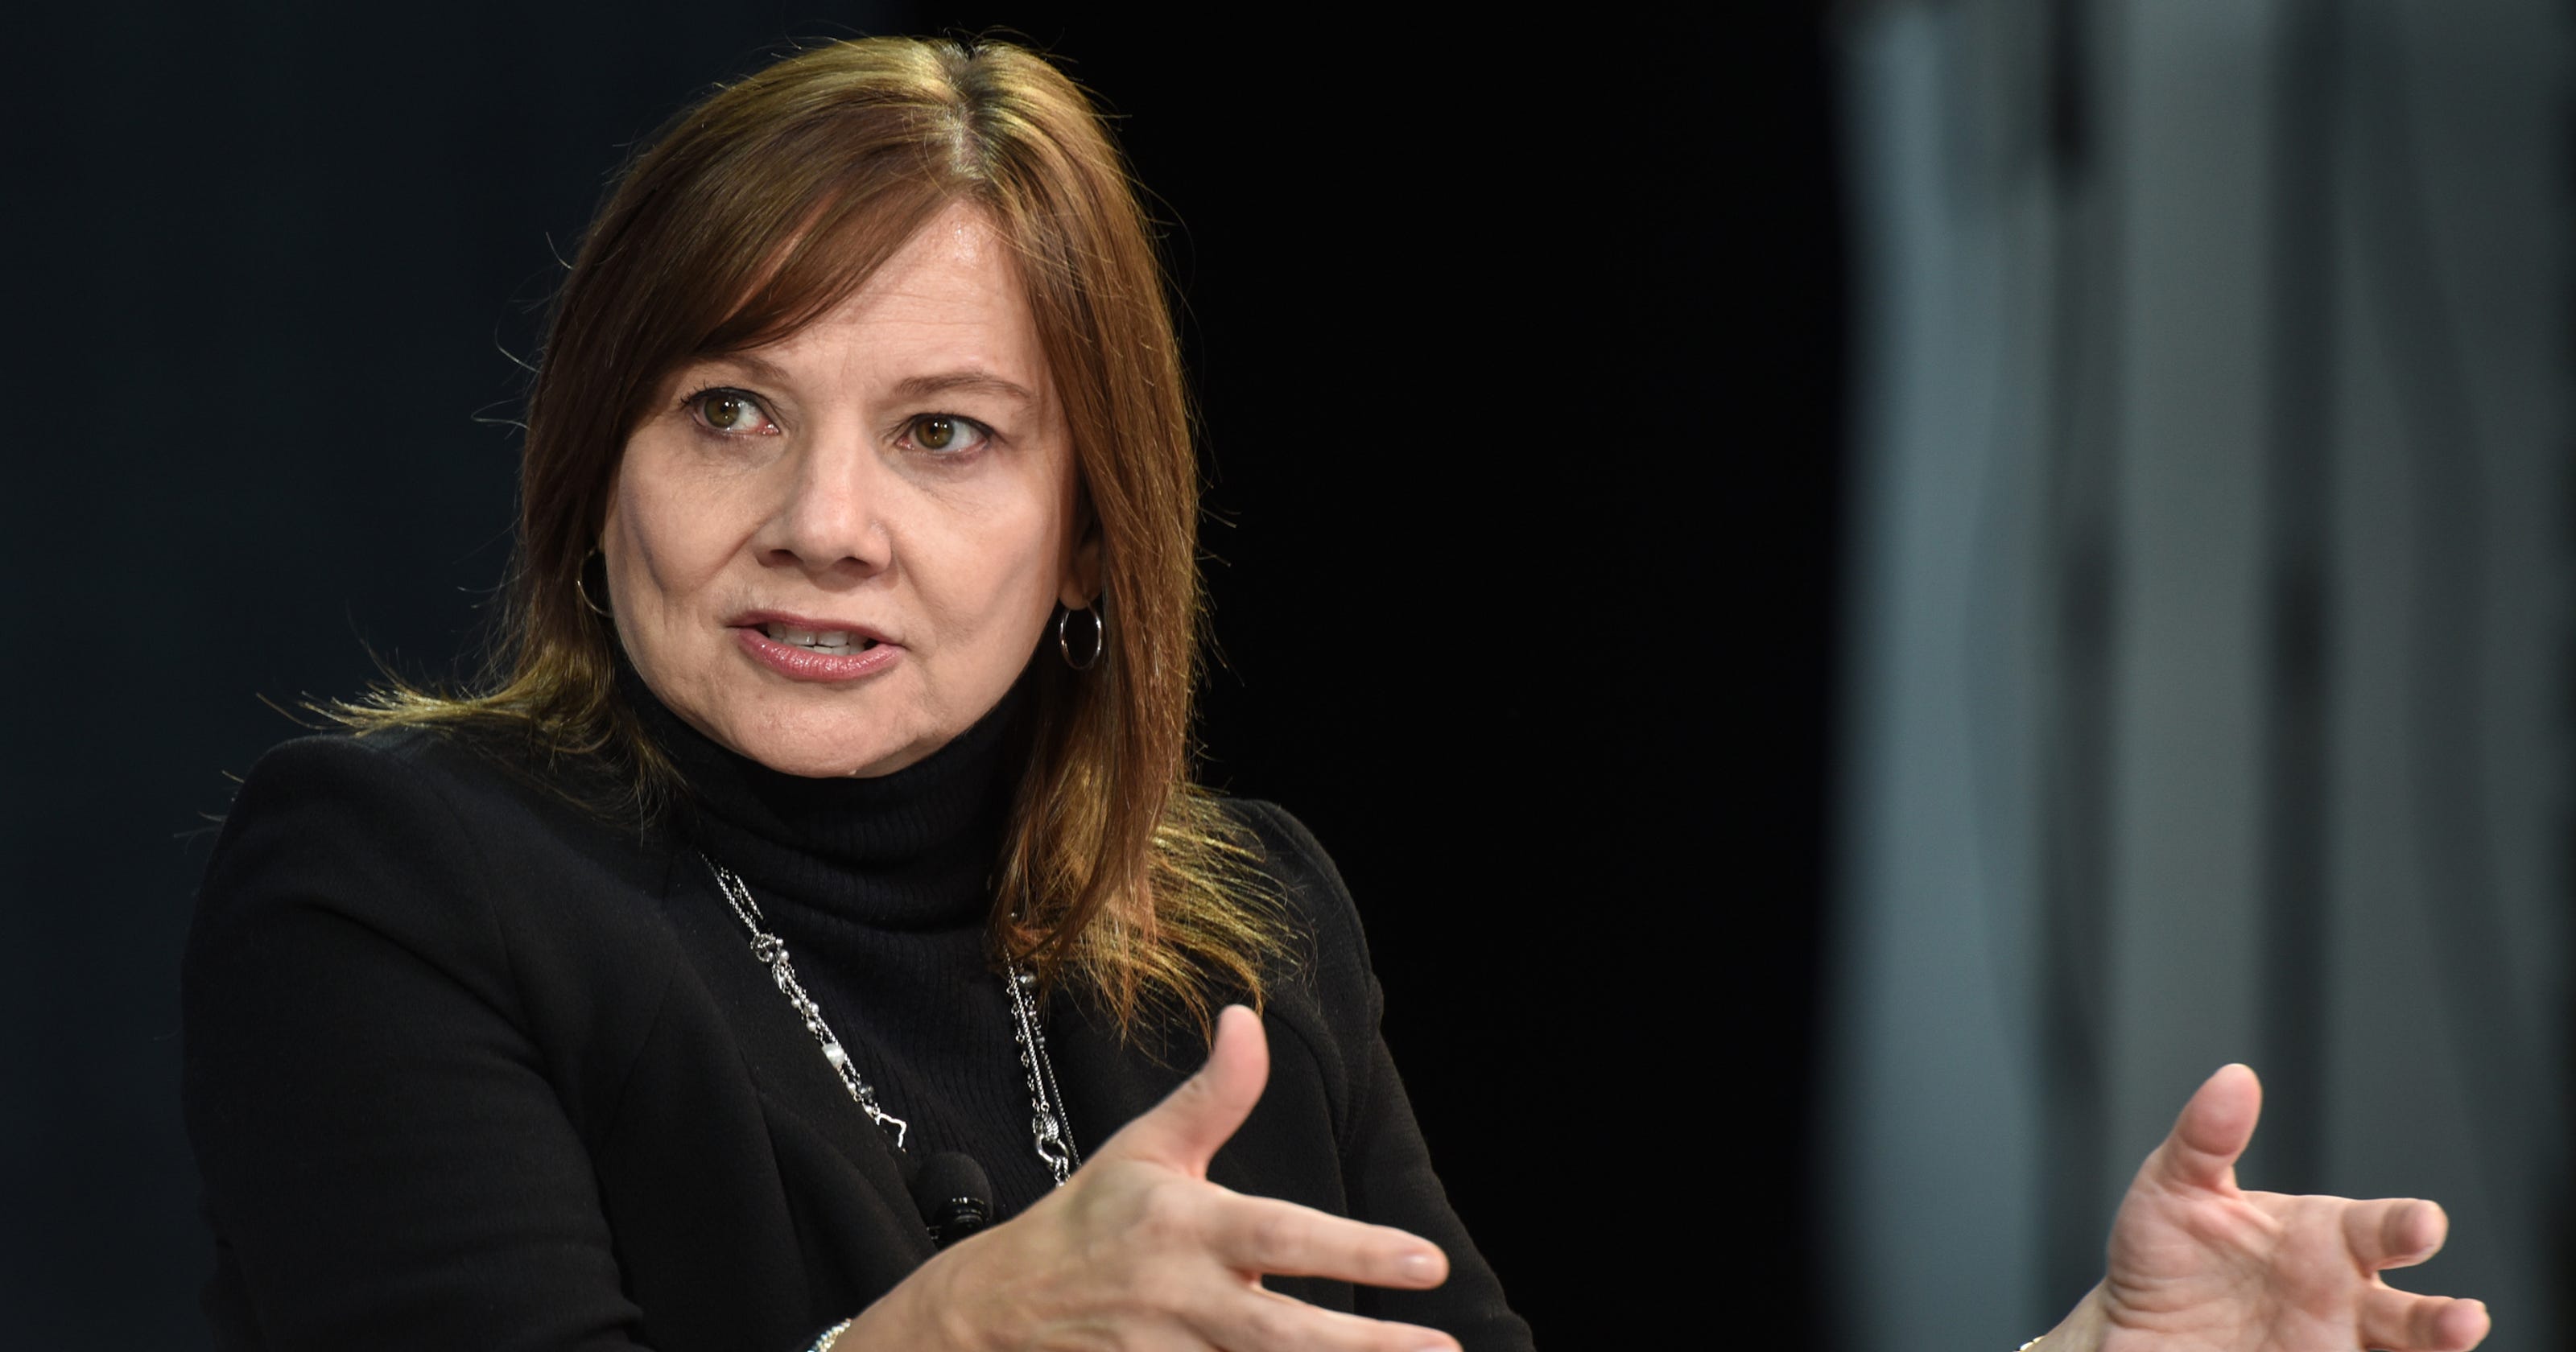 GM CEO Mary Barra What's her salary, goals?